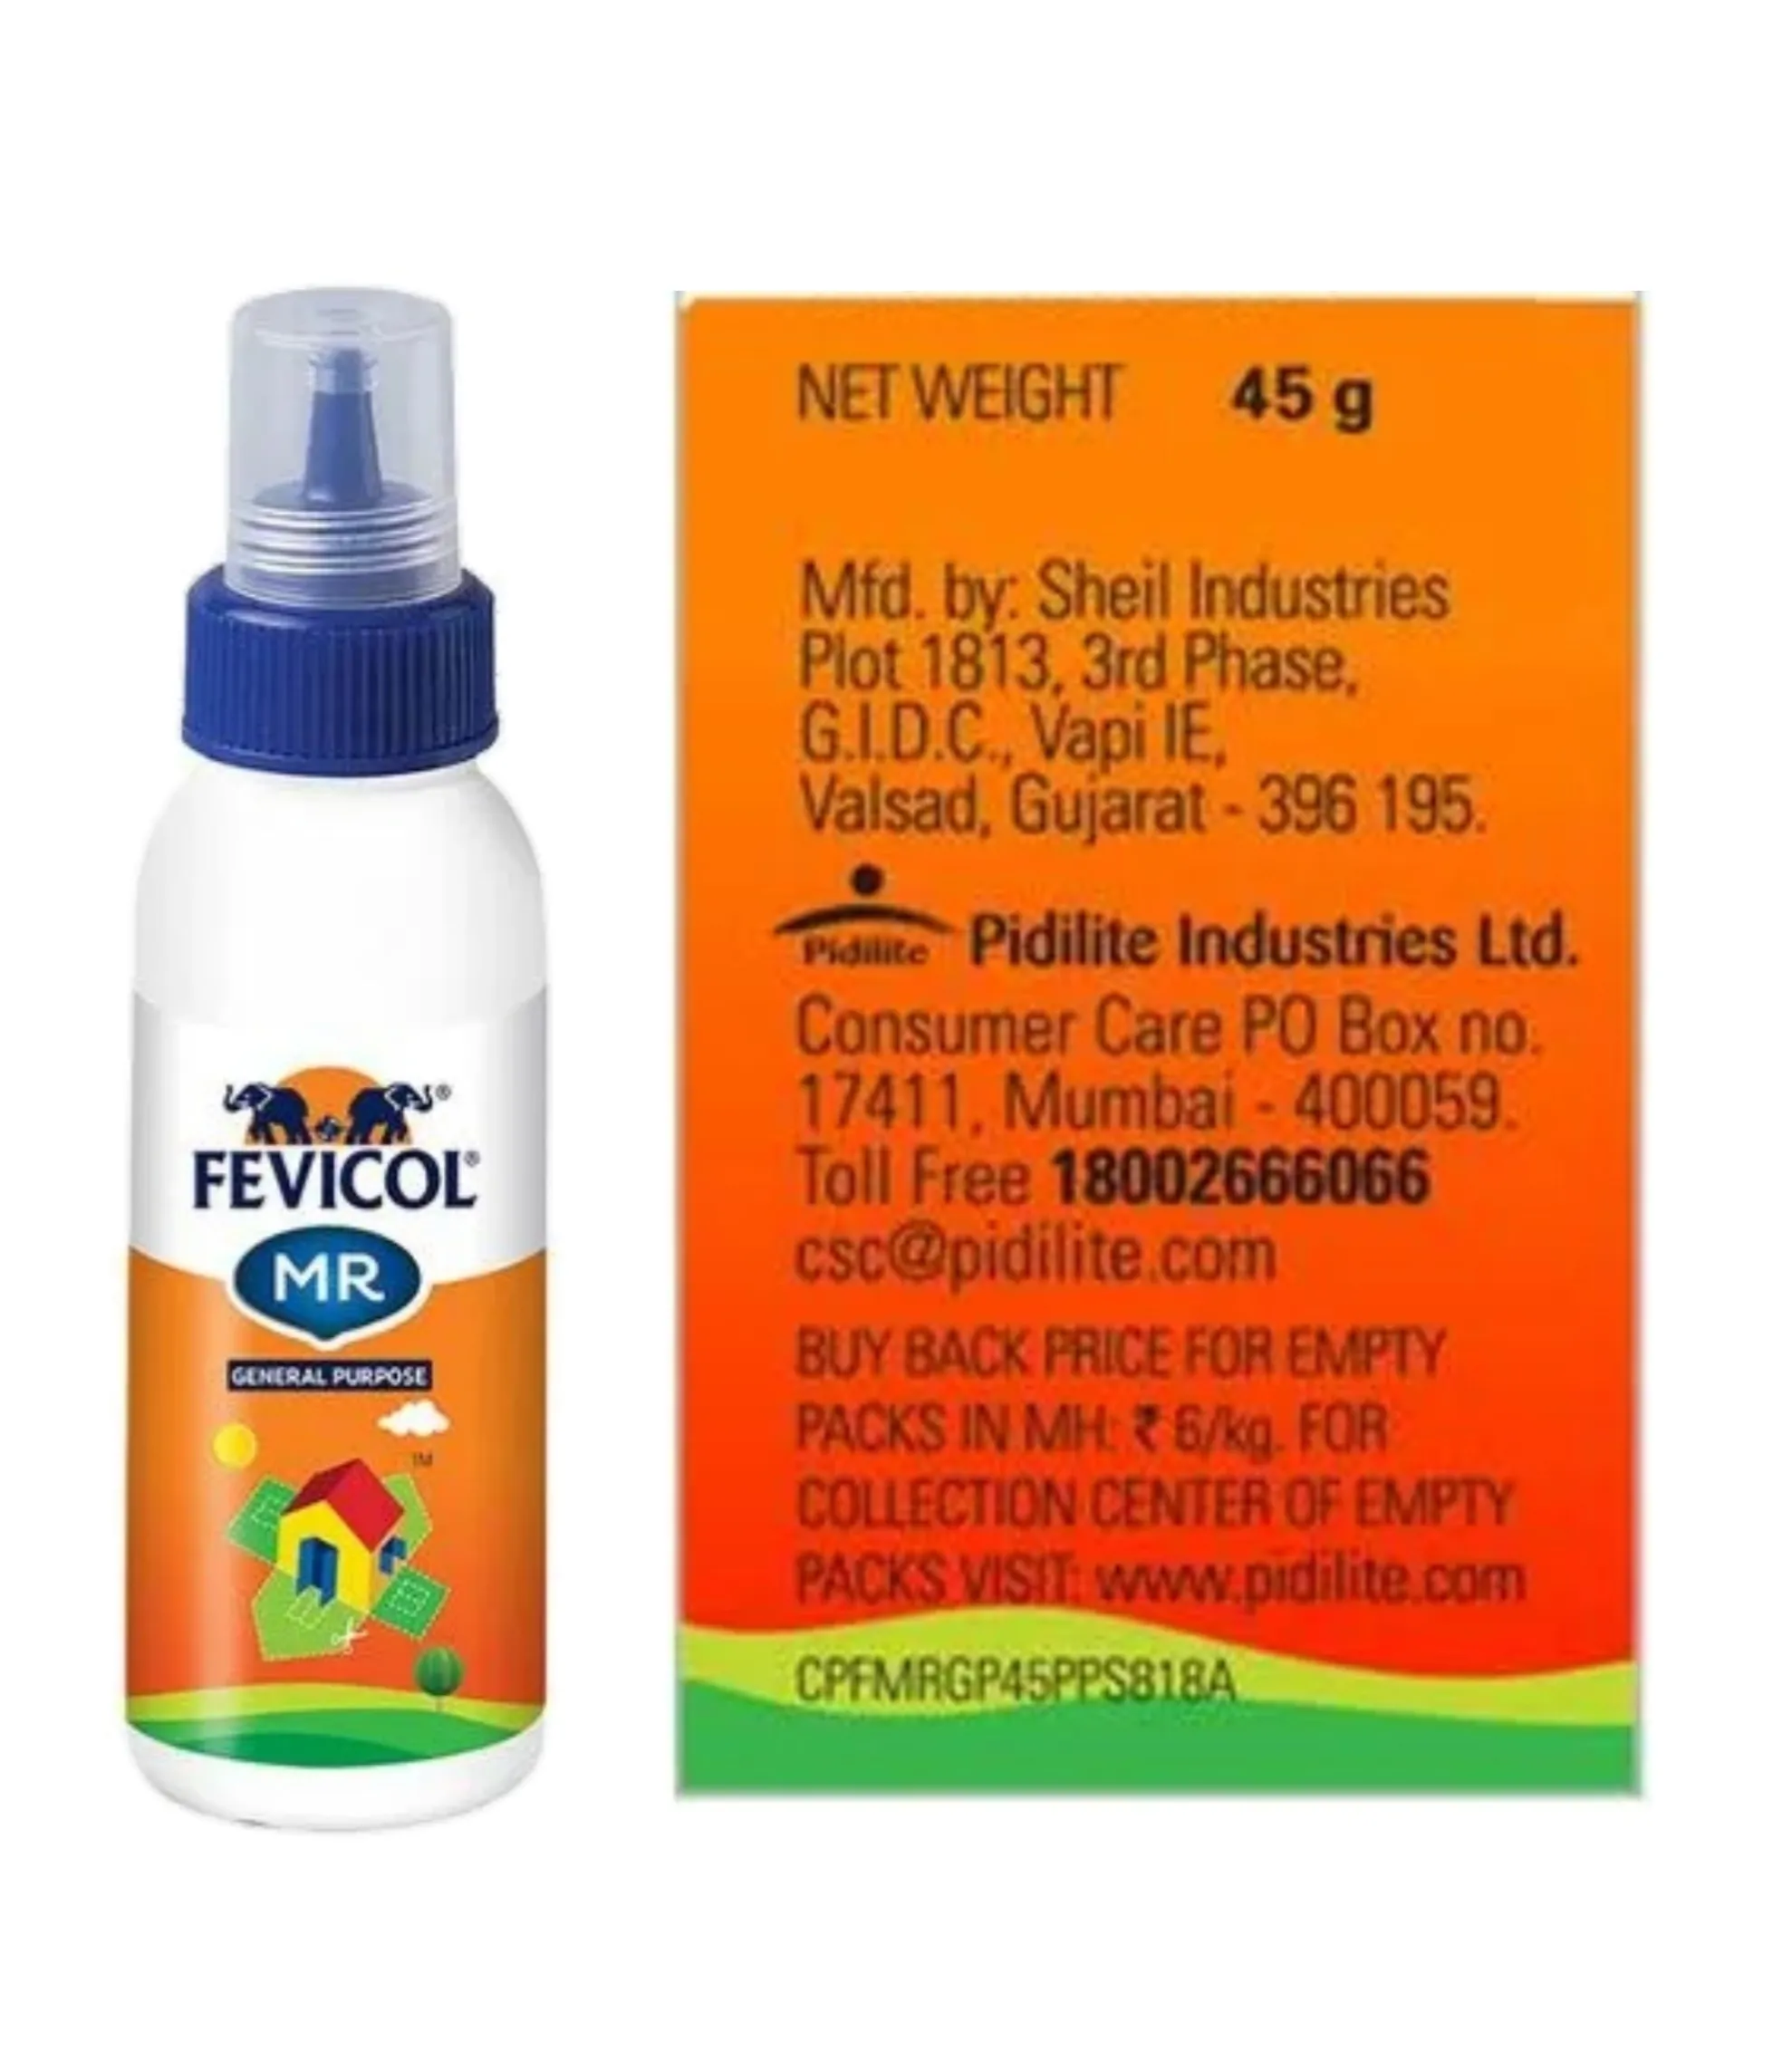 FEVICOL MR SQUEEZE BOTTLE, 45 gm,  PACK OF 10